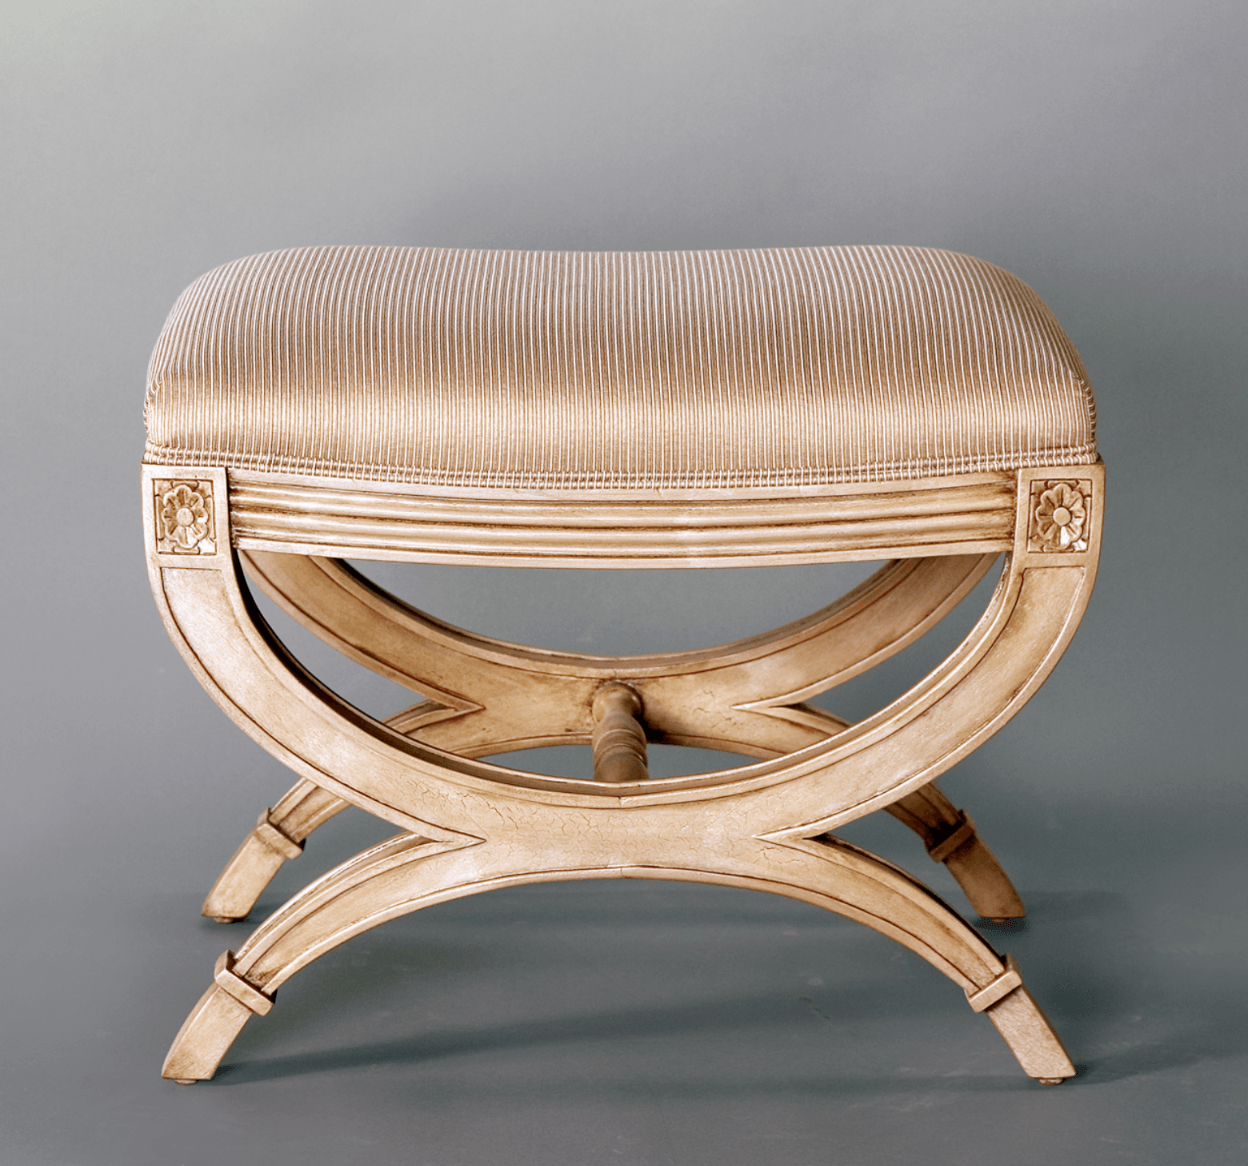 NEOCLASSIC STOOL - House of Chippendale